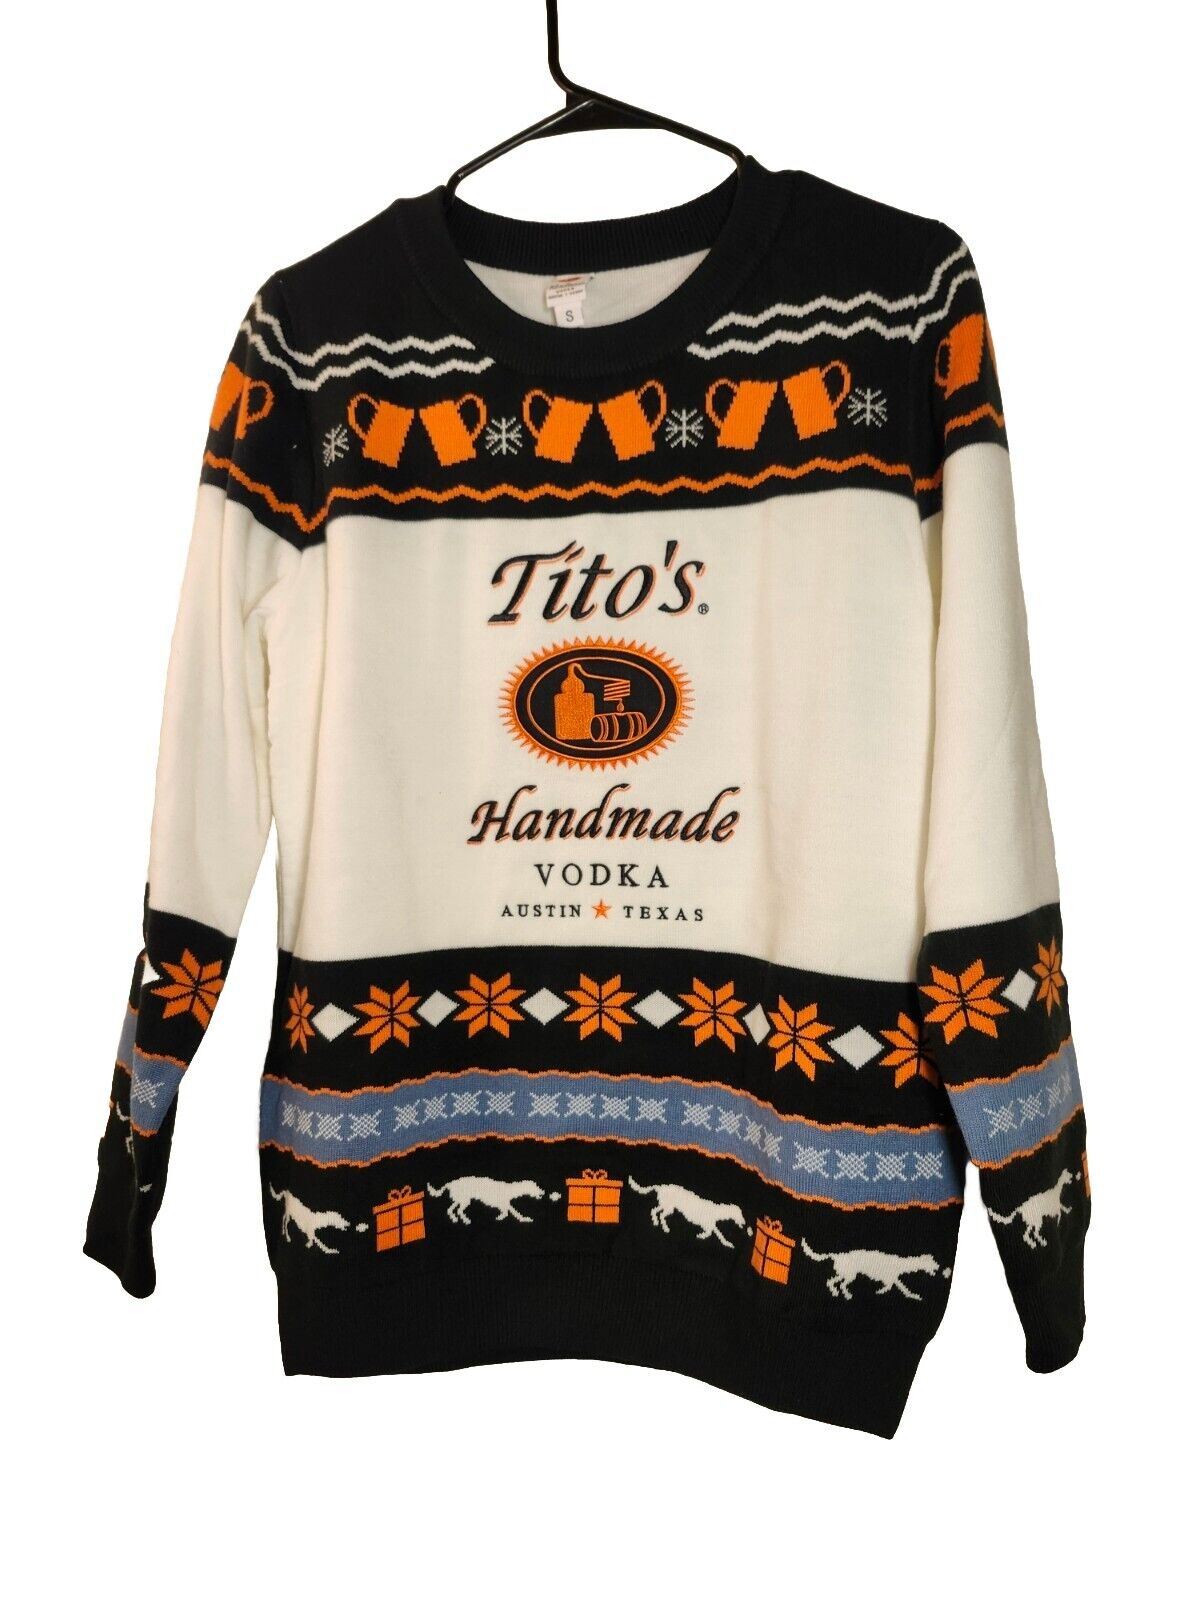 Titos Handmade Vodka Ugly Sweater - Mens Sz Small, New Without Tags 